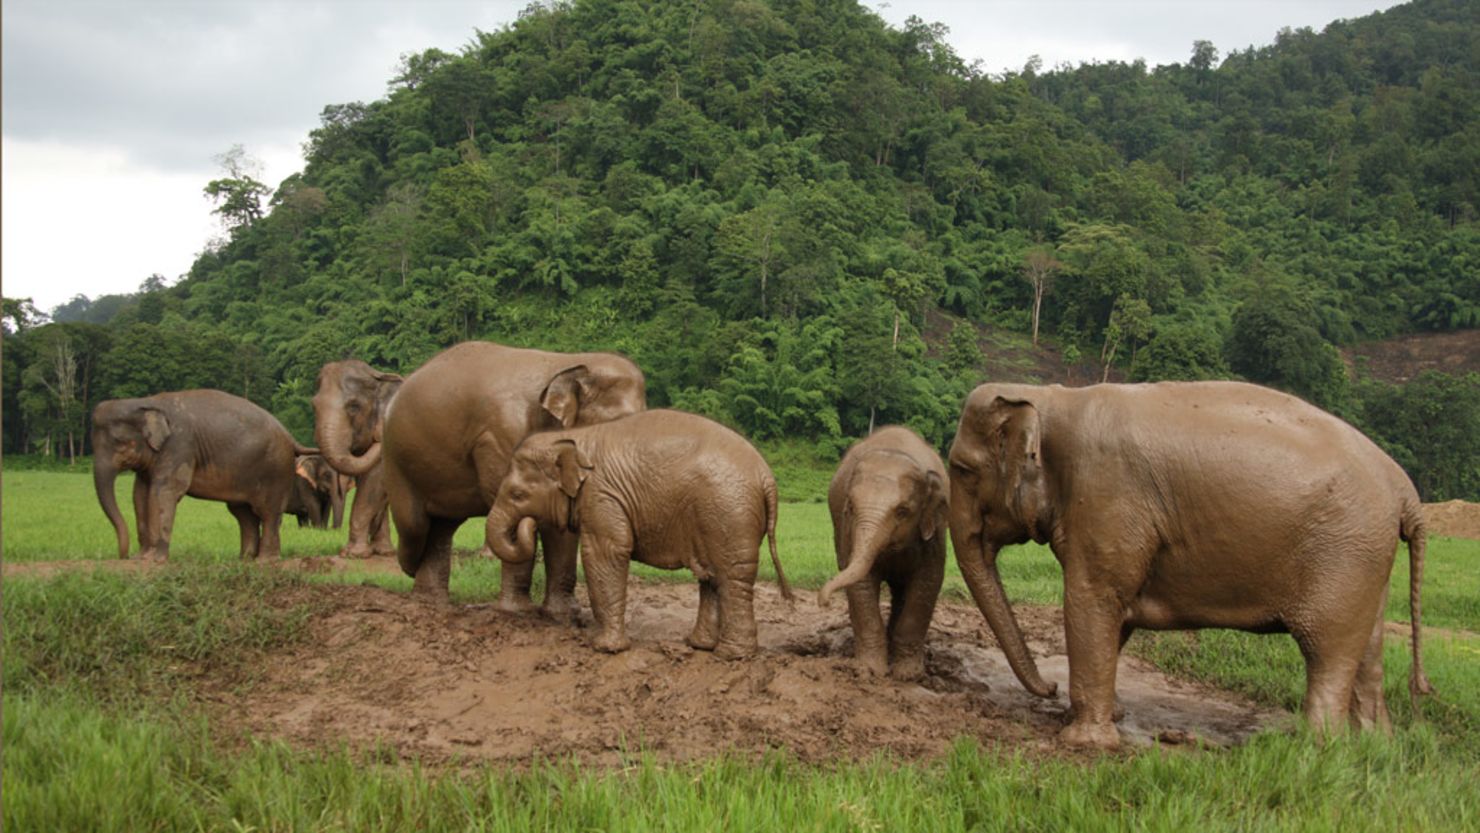 Family matters: Elephants in their natural family group at a rescue center in northern Thailand